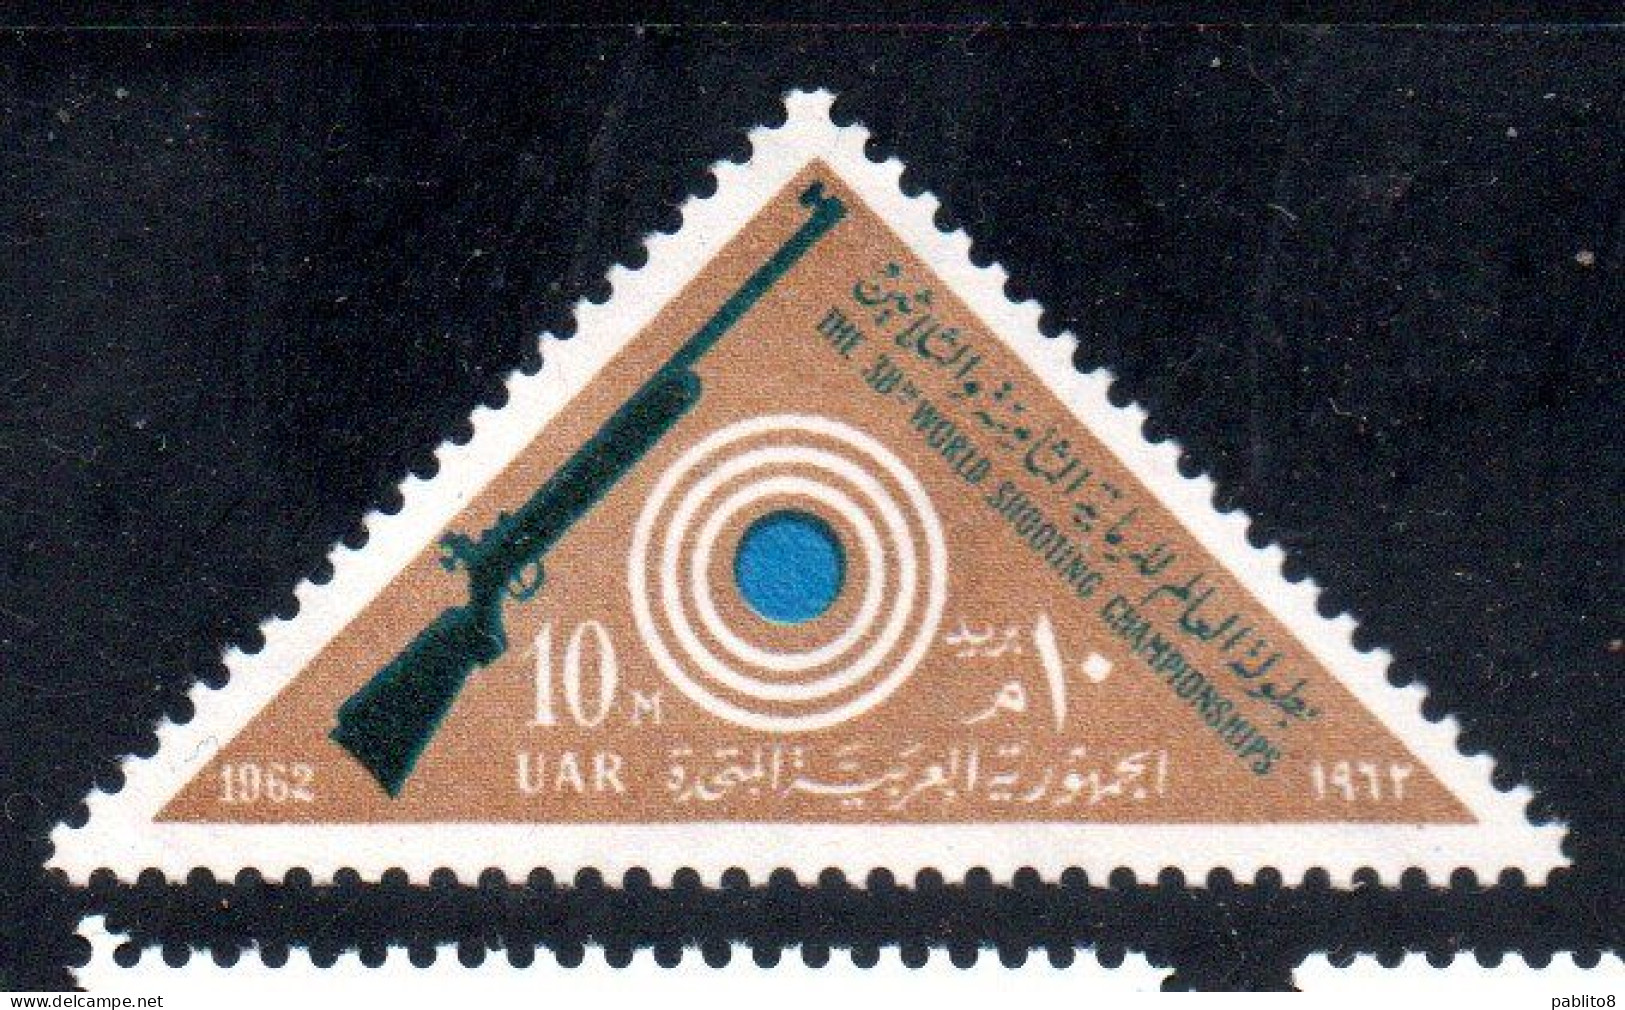 UAR EGYPT EGITTO 1962 WORLD SHOOTING CHAMPIONSHIPS AND AFRICAN TABLE TENNIS TOURNAMENT RIFLE AND TARGET 10m MNH - Nuevos